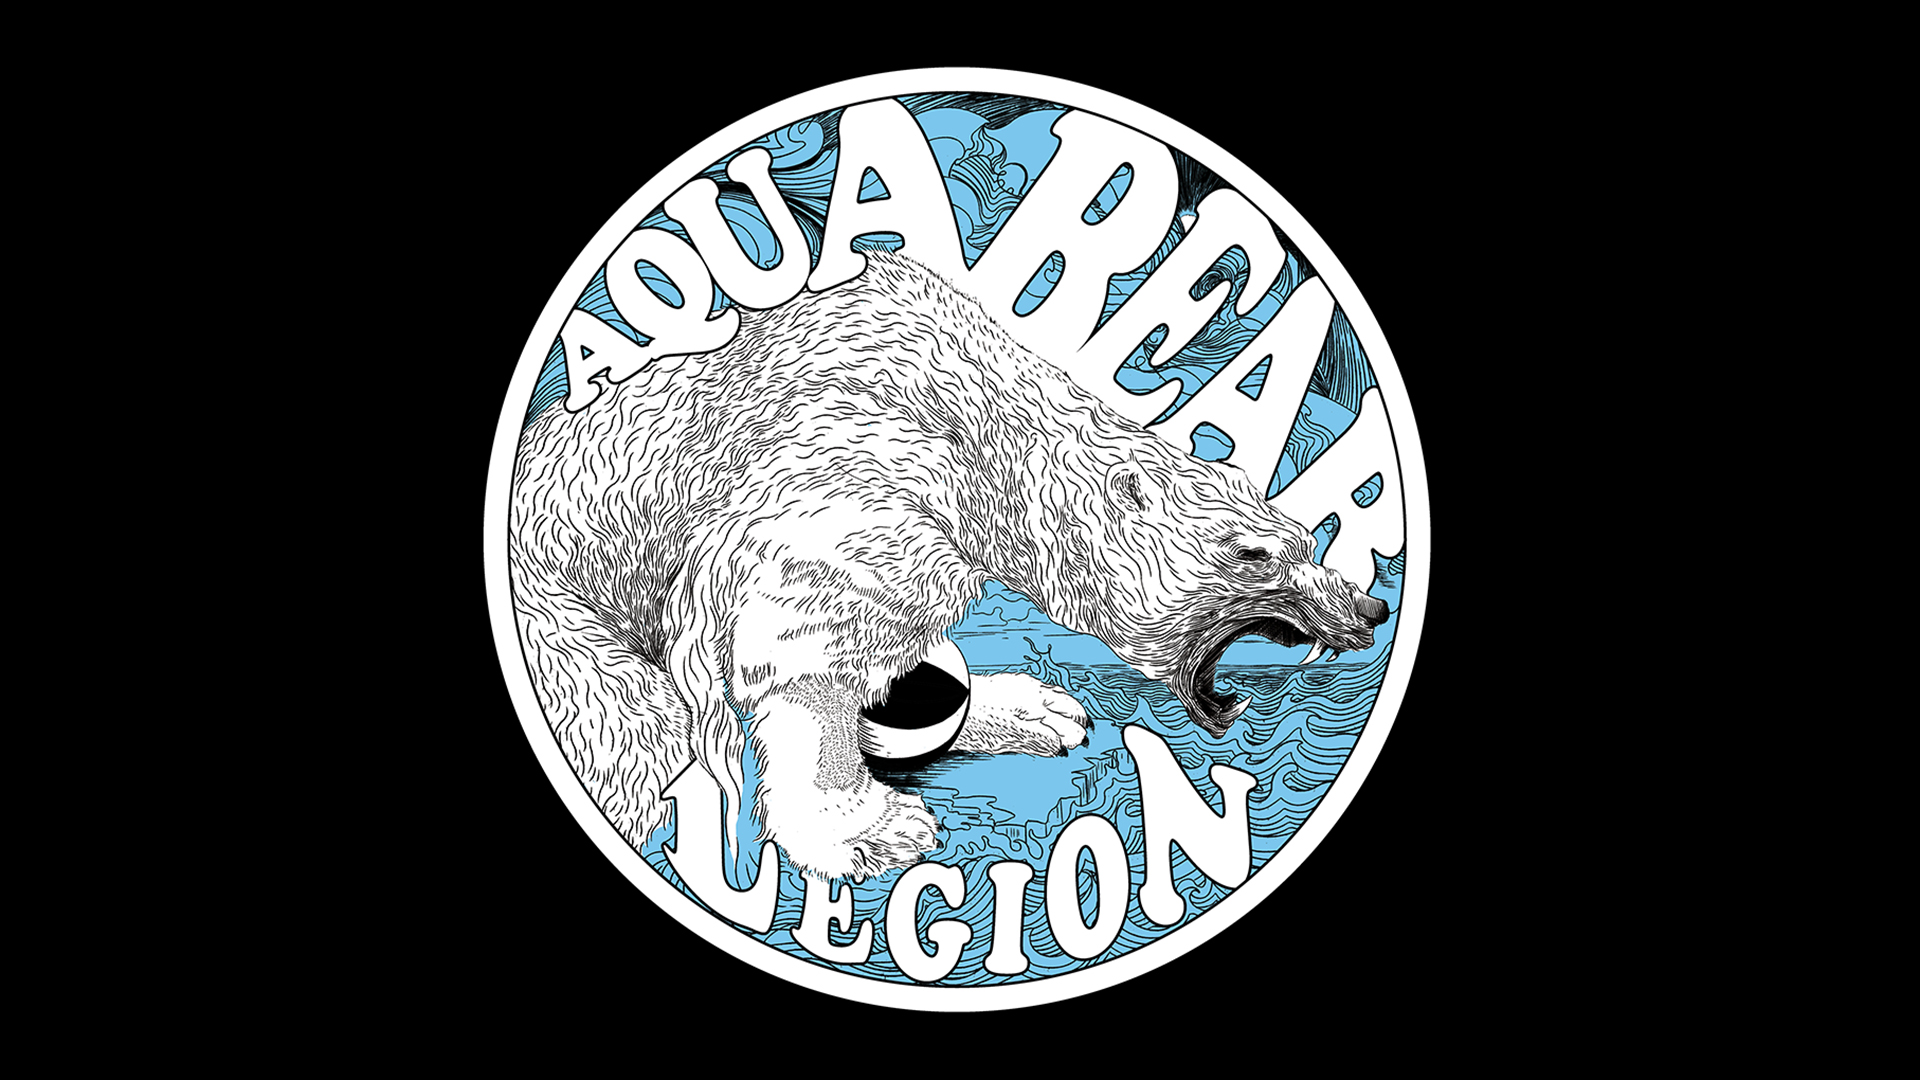 Aquabear 2021: Two Archival Compilations, New Merch, and More!